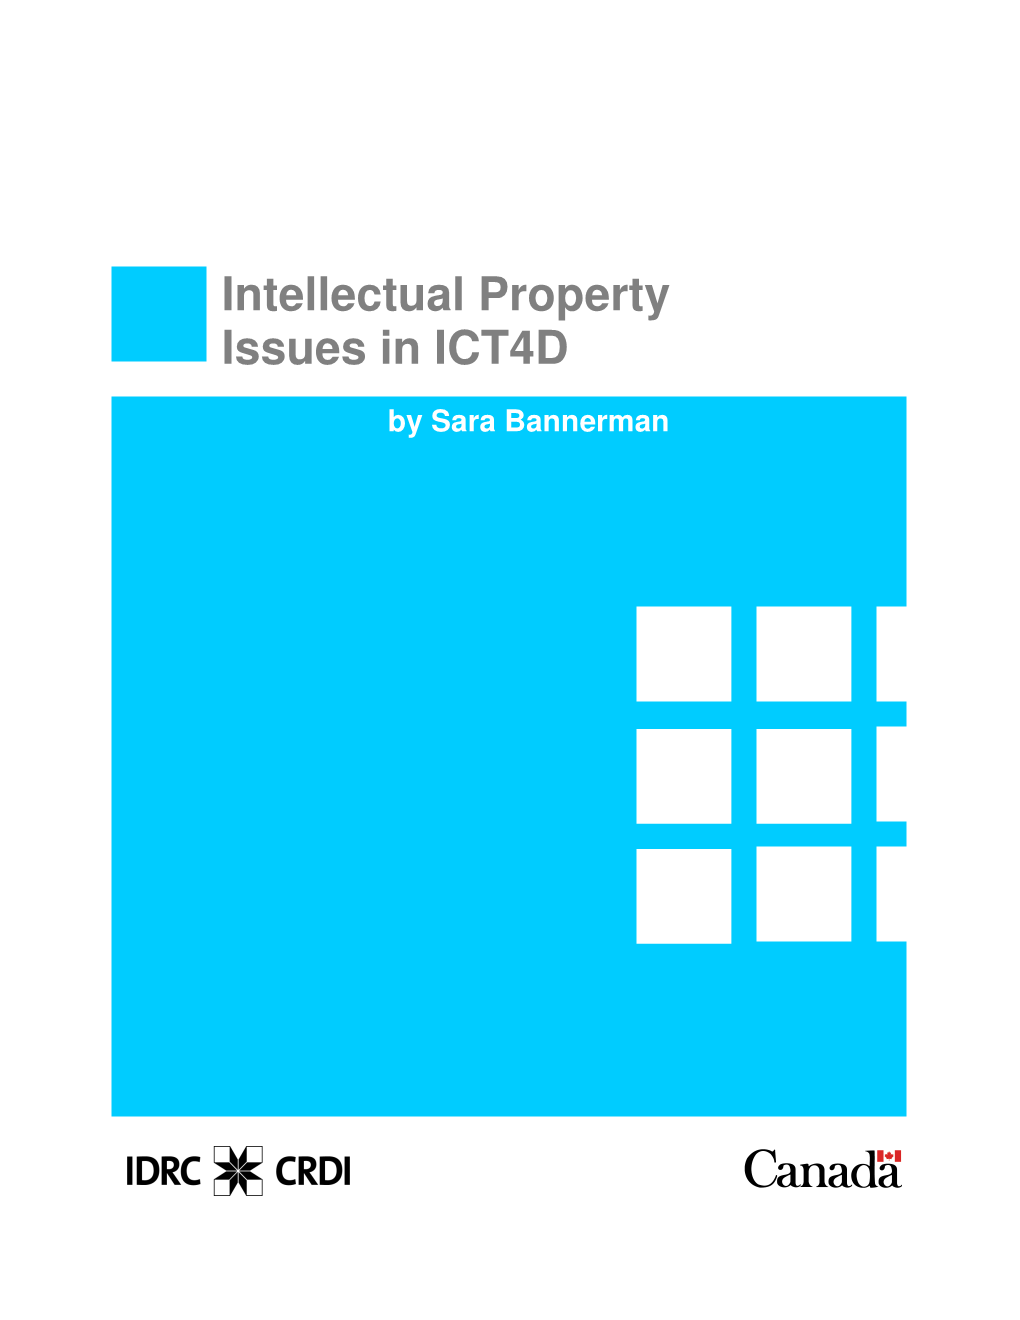 Intellectual Property Issues in ICT4D for Some Time